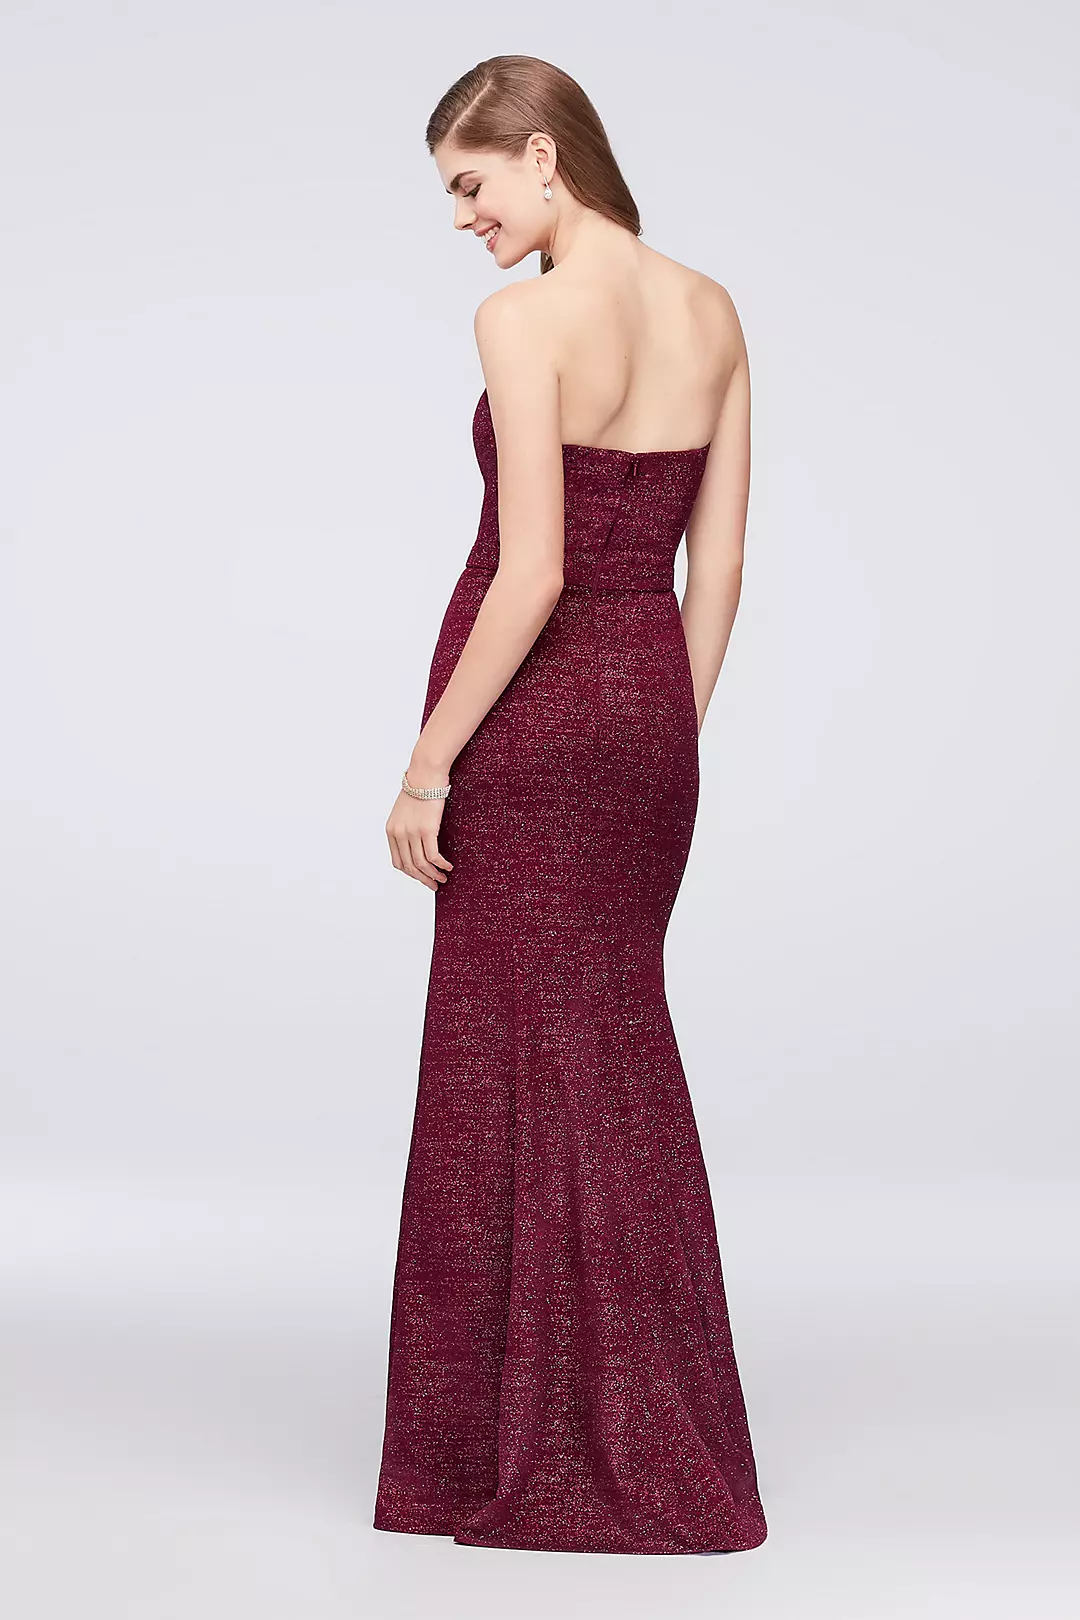 Strapless Plunge Glitter Knit Mermaid Gown  Image 2